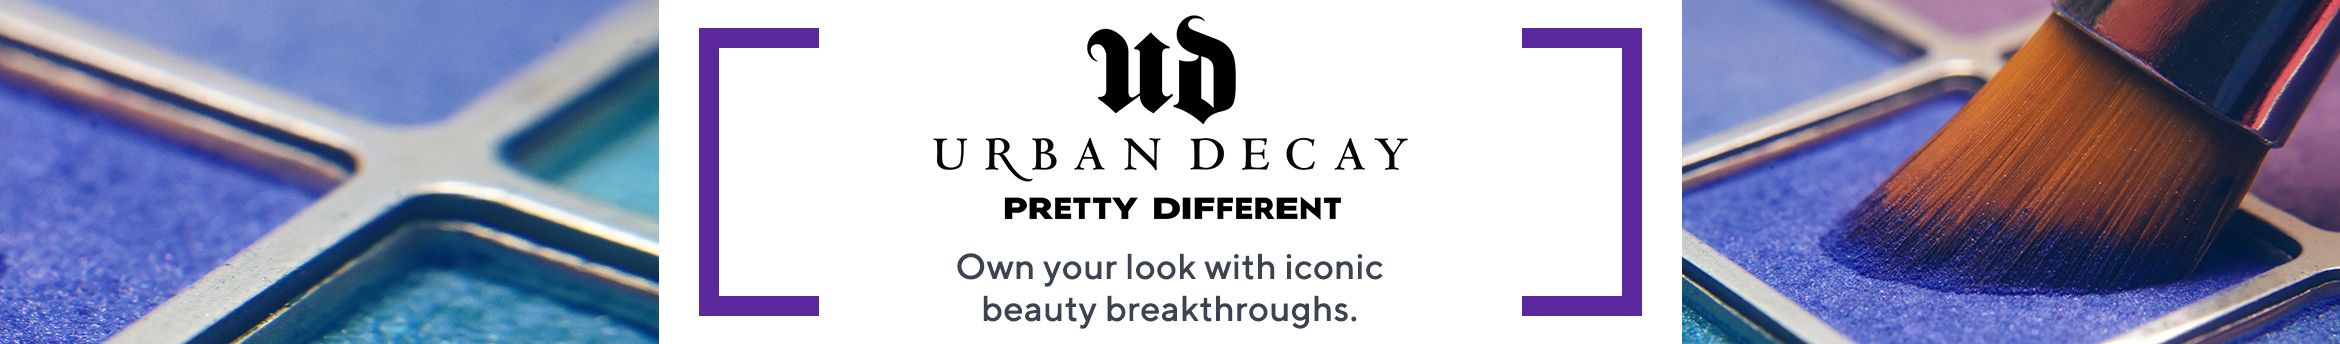 Urban Decay Pretty Different Own your look with iconic beauty breakthroughs